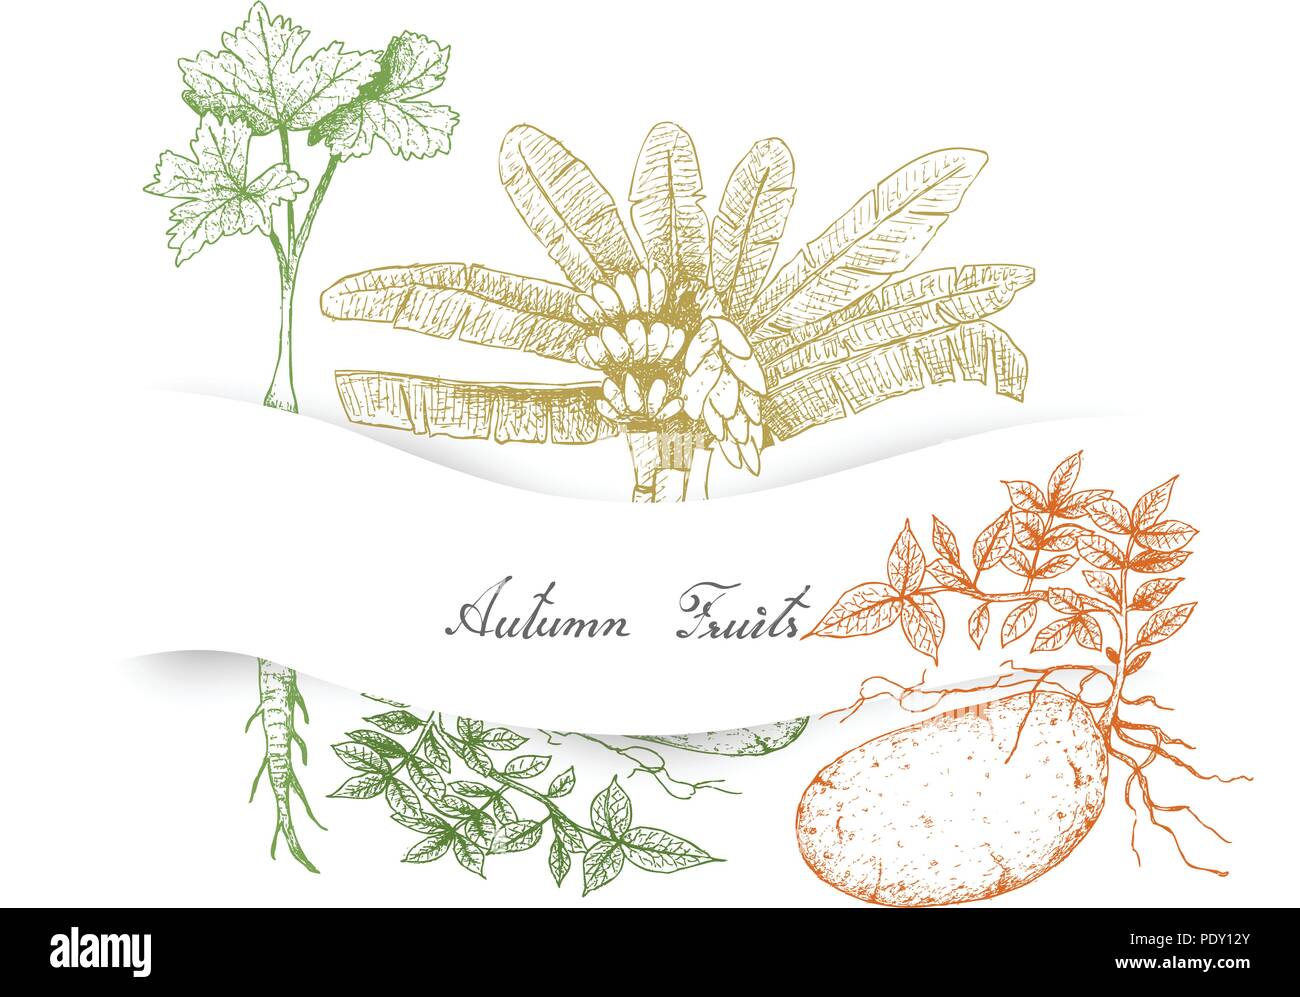 Autumn Vegetables and Herbs, Illustration Hand Drawn Sketch of Ensete Banana, Parsnip and Potatoes. Stock Vector